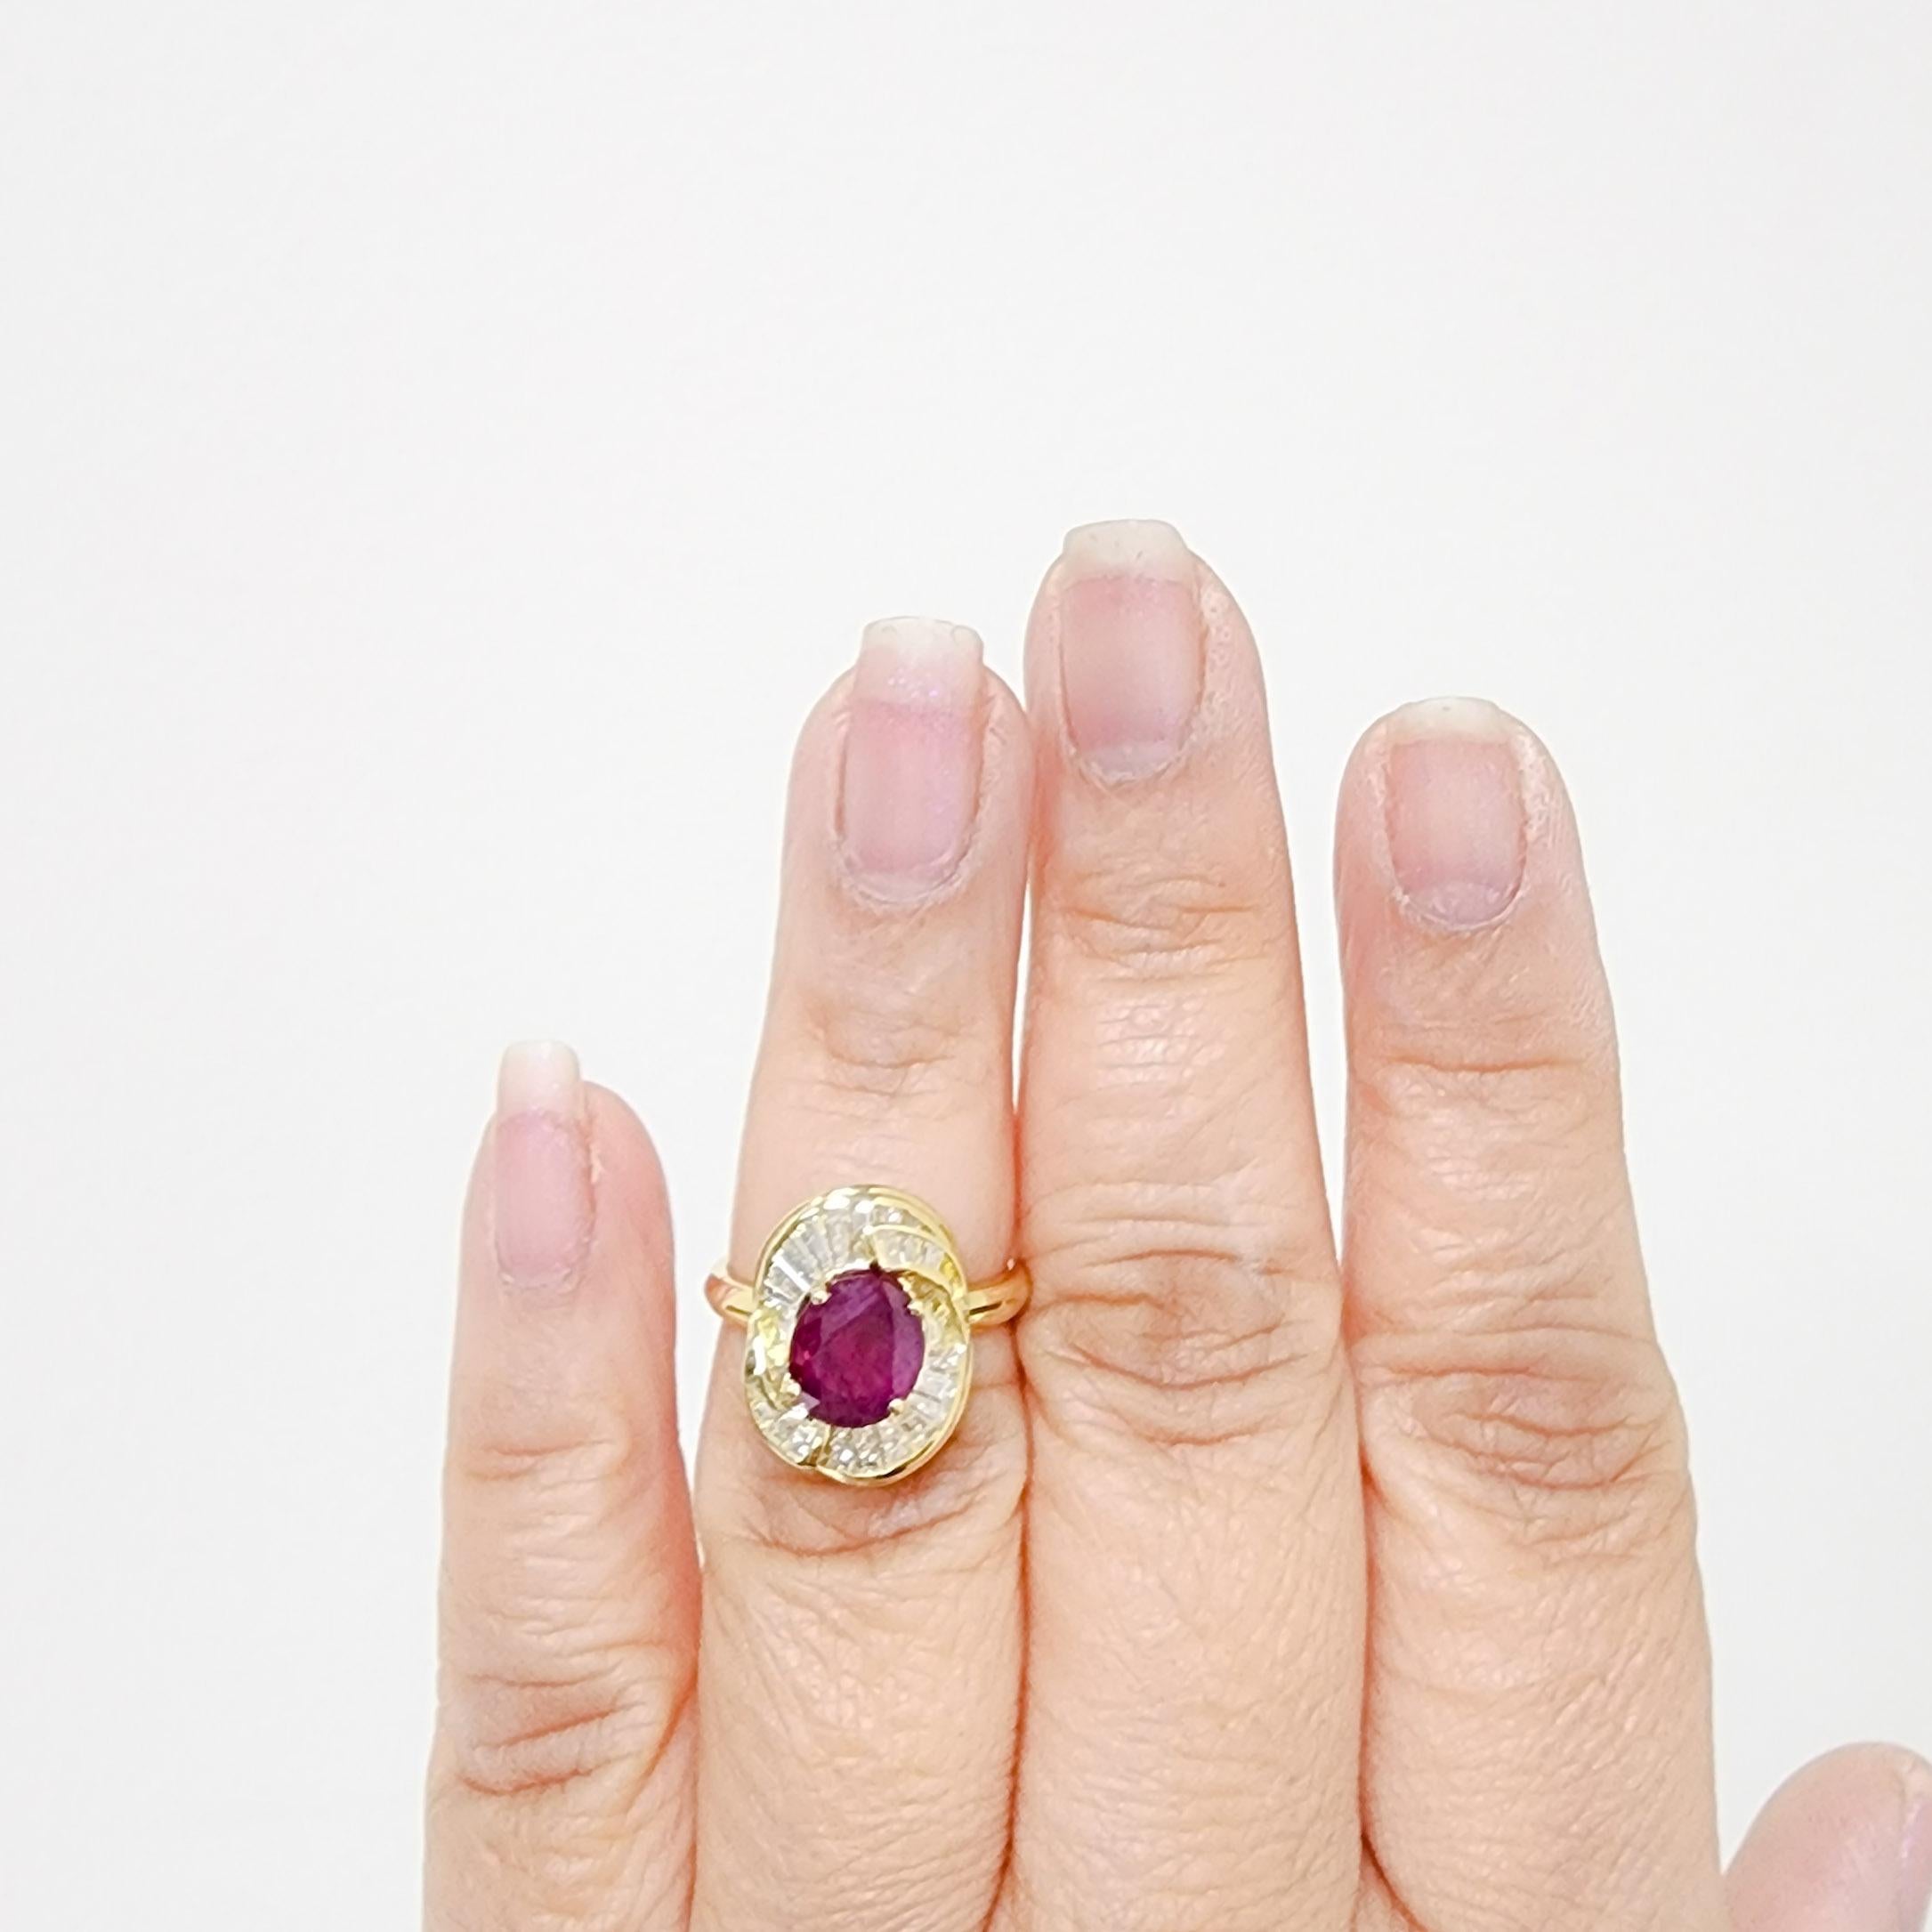 Beautiful 2.81 ct. Burma red ruby oval with 1.00 ct. of good quality white diamond baguettes.  Handmade in 18k yellow gold.  Ring size 6.25.  GIA certificate included.